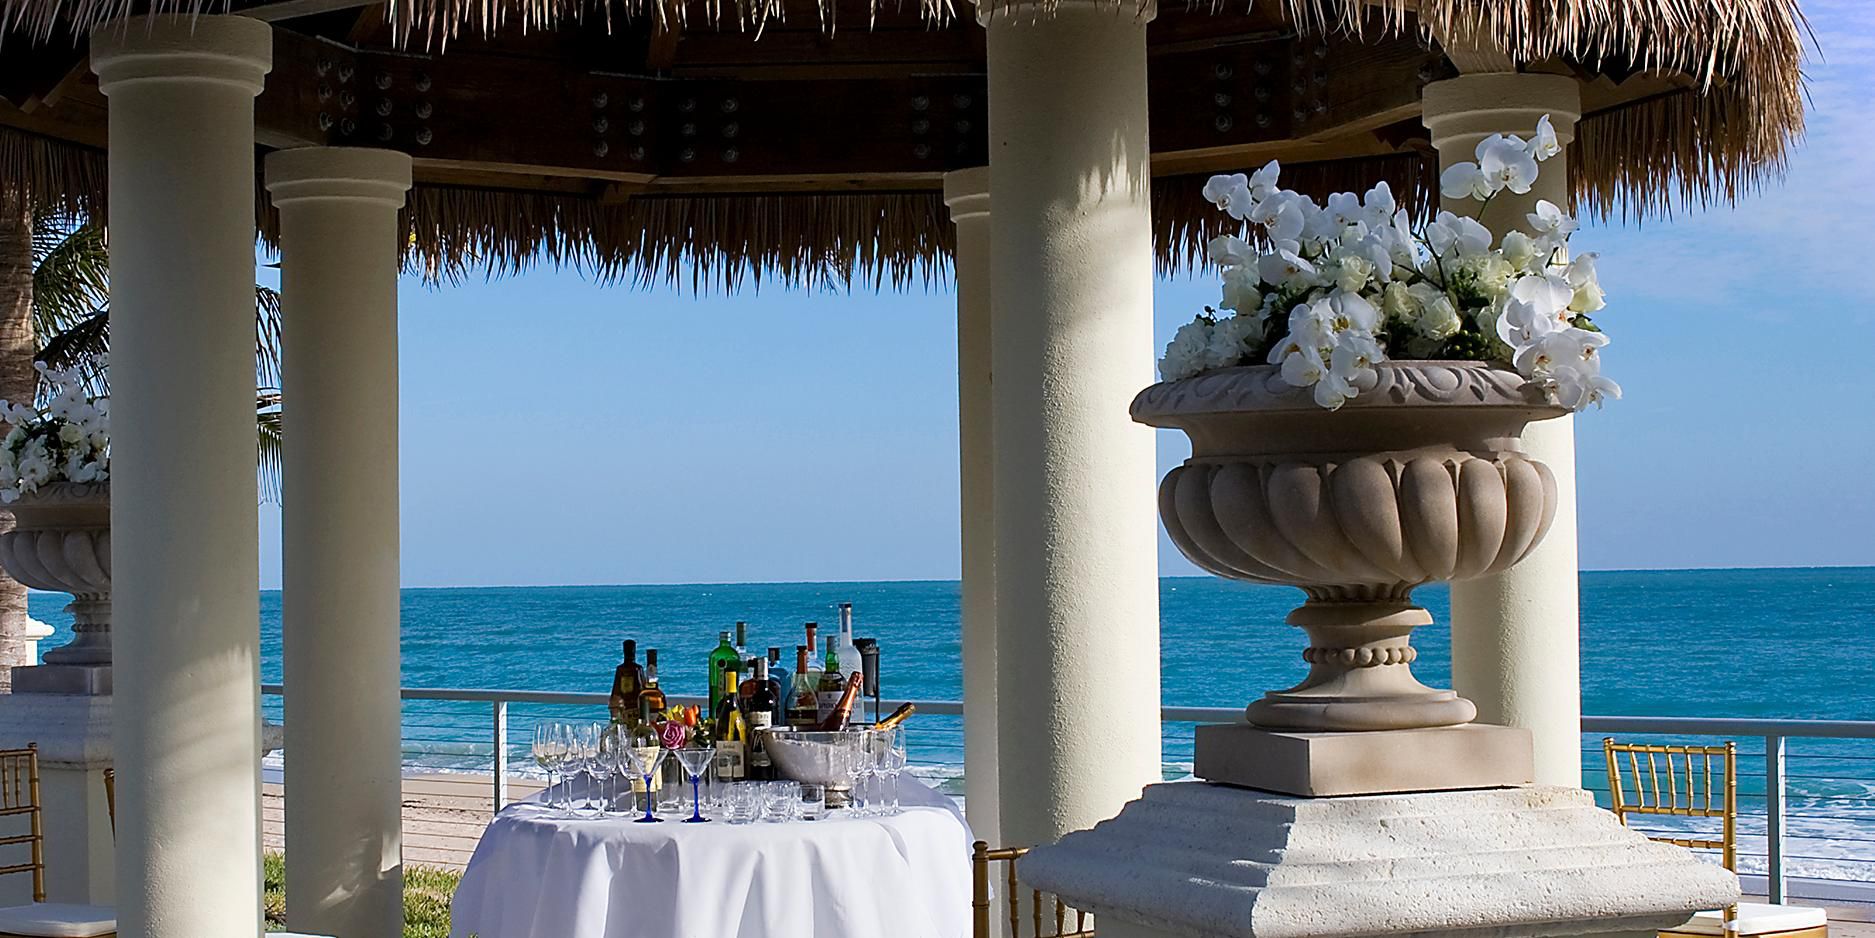 From the moment it was envisioned, it was clear that the Vero Beach Hotel & Spa and Cobalt Restaurant would provide the perfect venue for wedding ceremonies and receptions. With unsurpassed hospitality, remarkable design and stunning ocean views, every element is in place to make your day legendary.